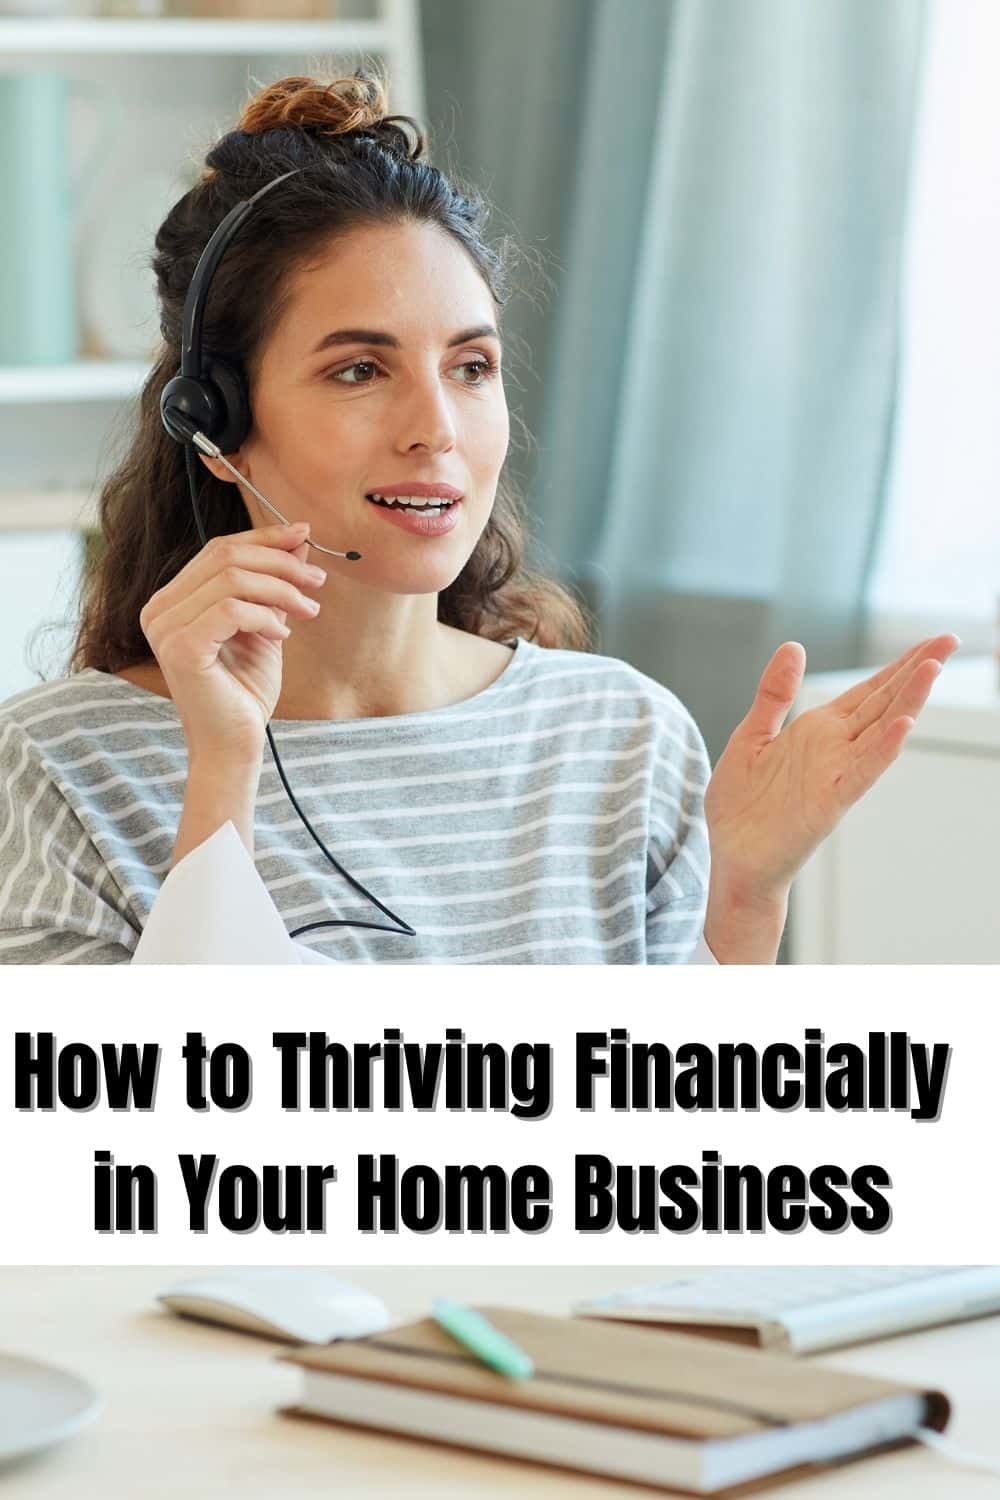 How to Thriving Financially in Your Home Business